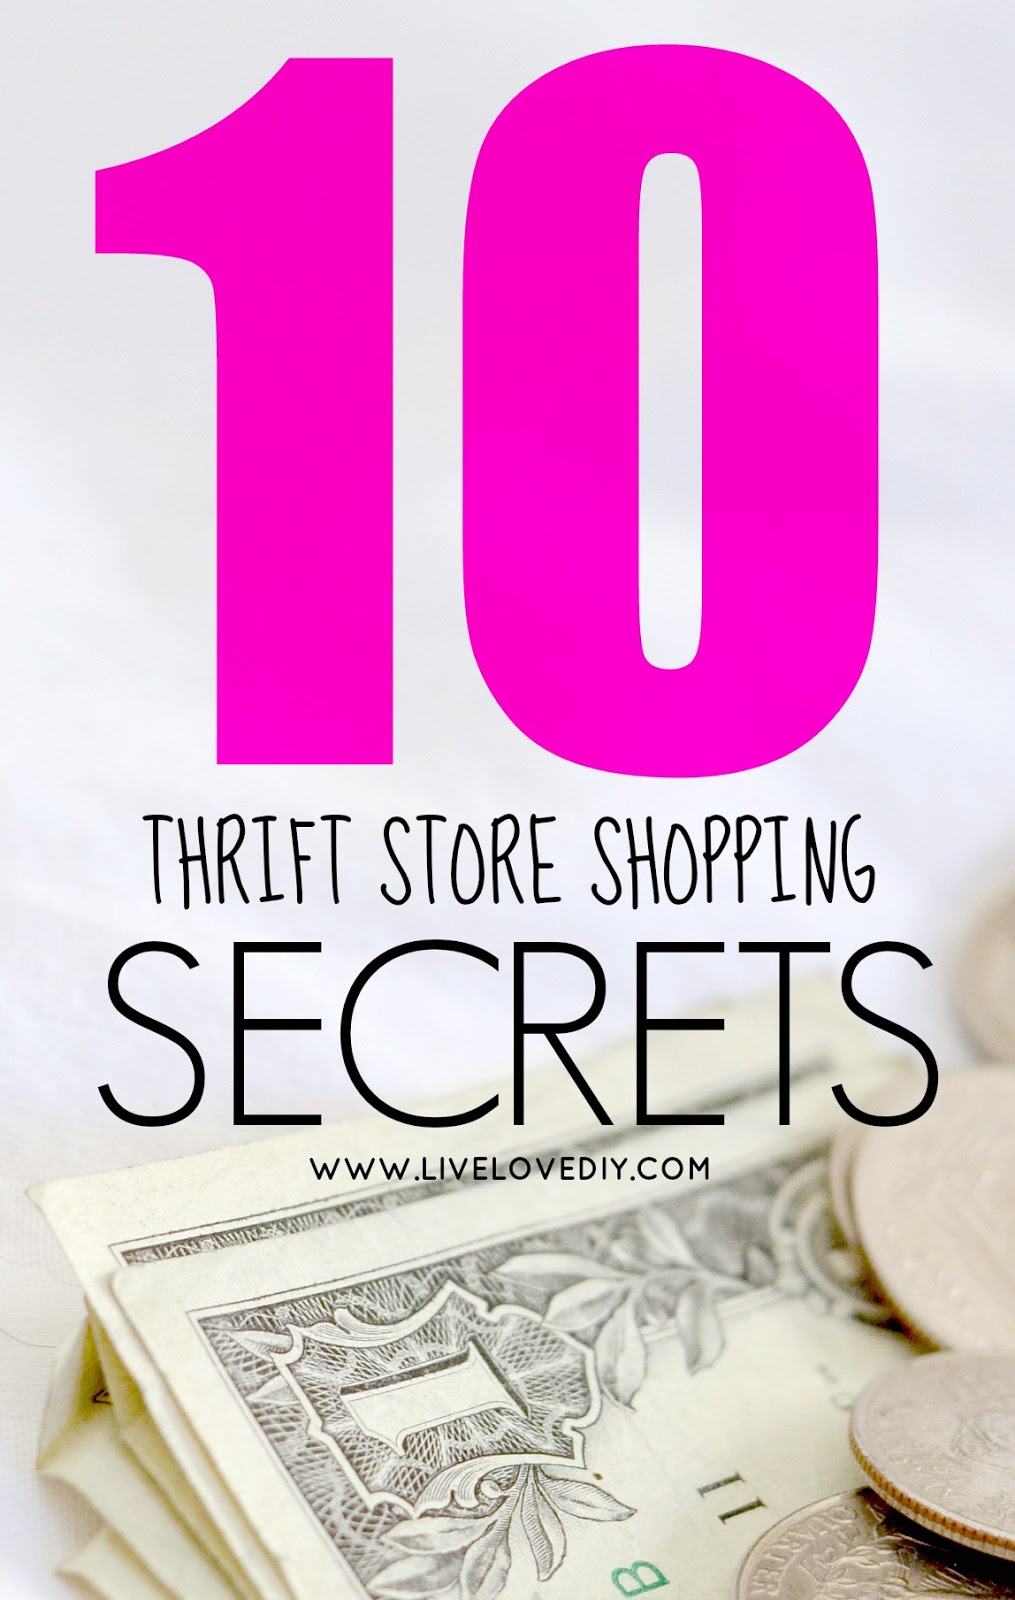 10 Thrift Store Shopping Secrets You Should Know! These are SO good!